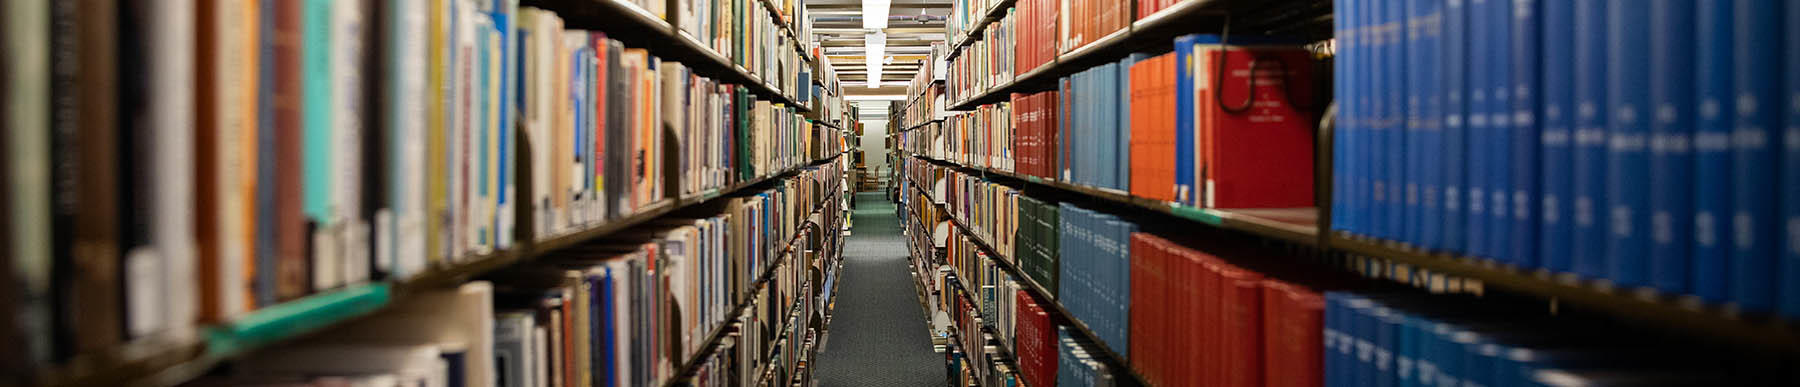 Books in Dinand library